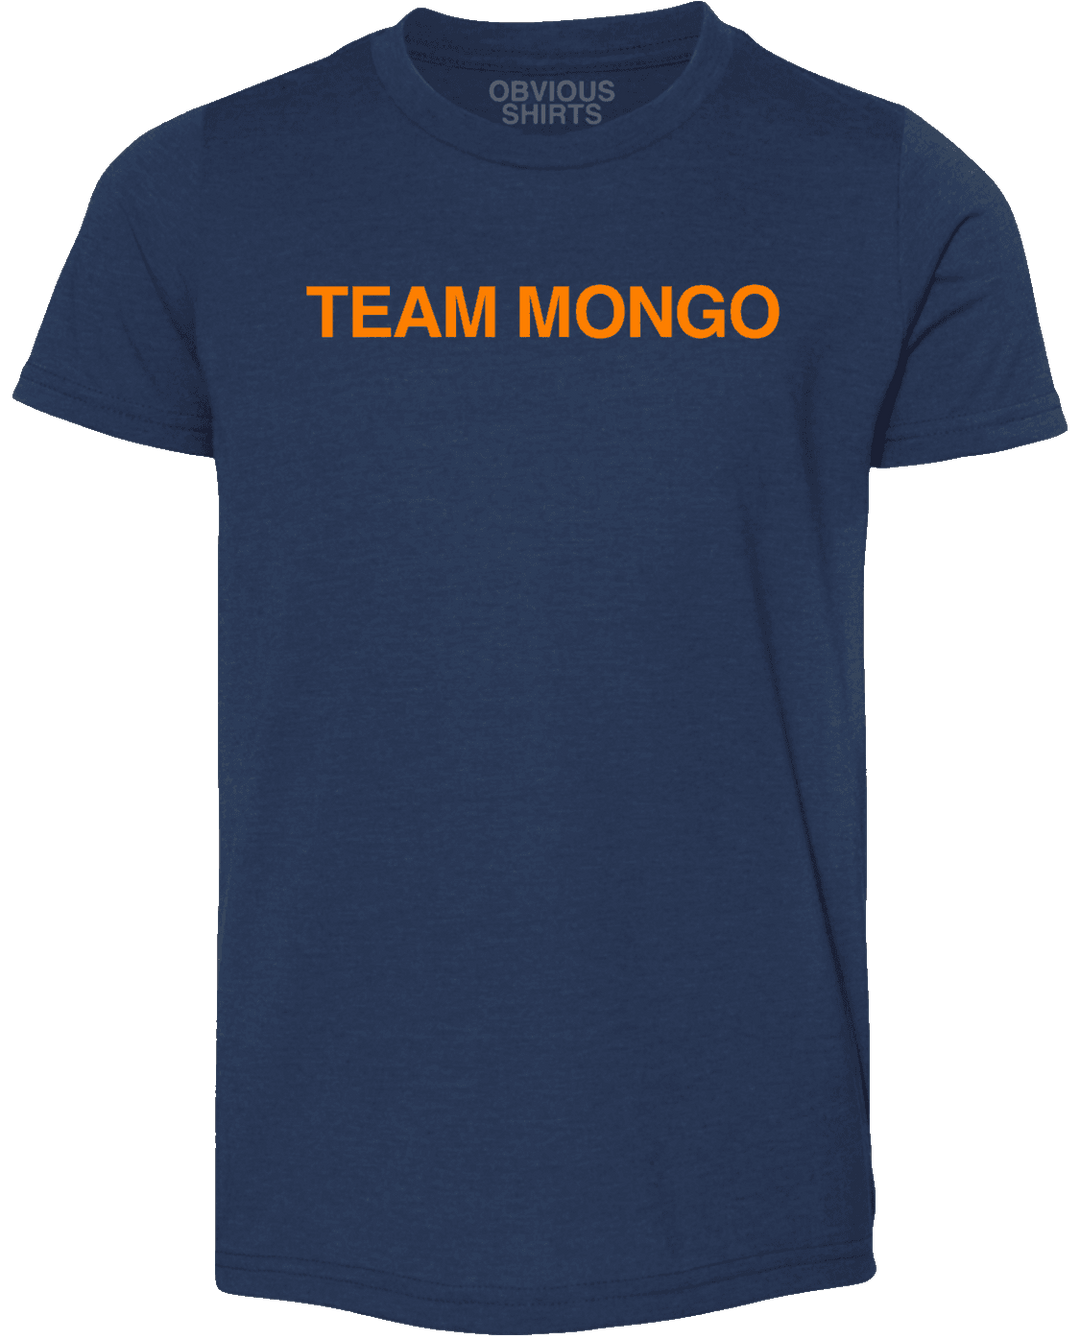 TEAM MONGO. (YOUTH) - OBVIOUS SHIRTS.